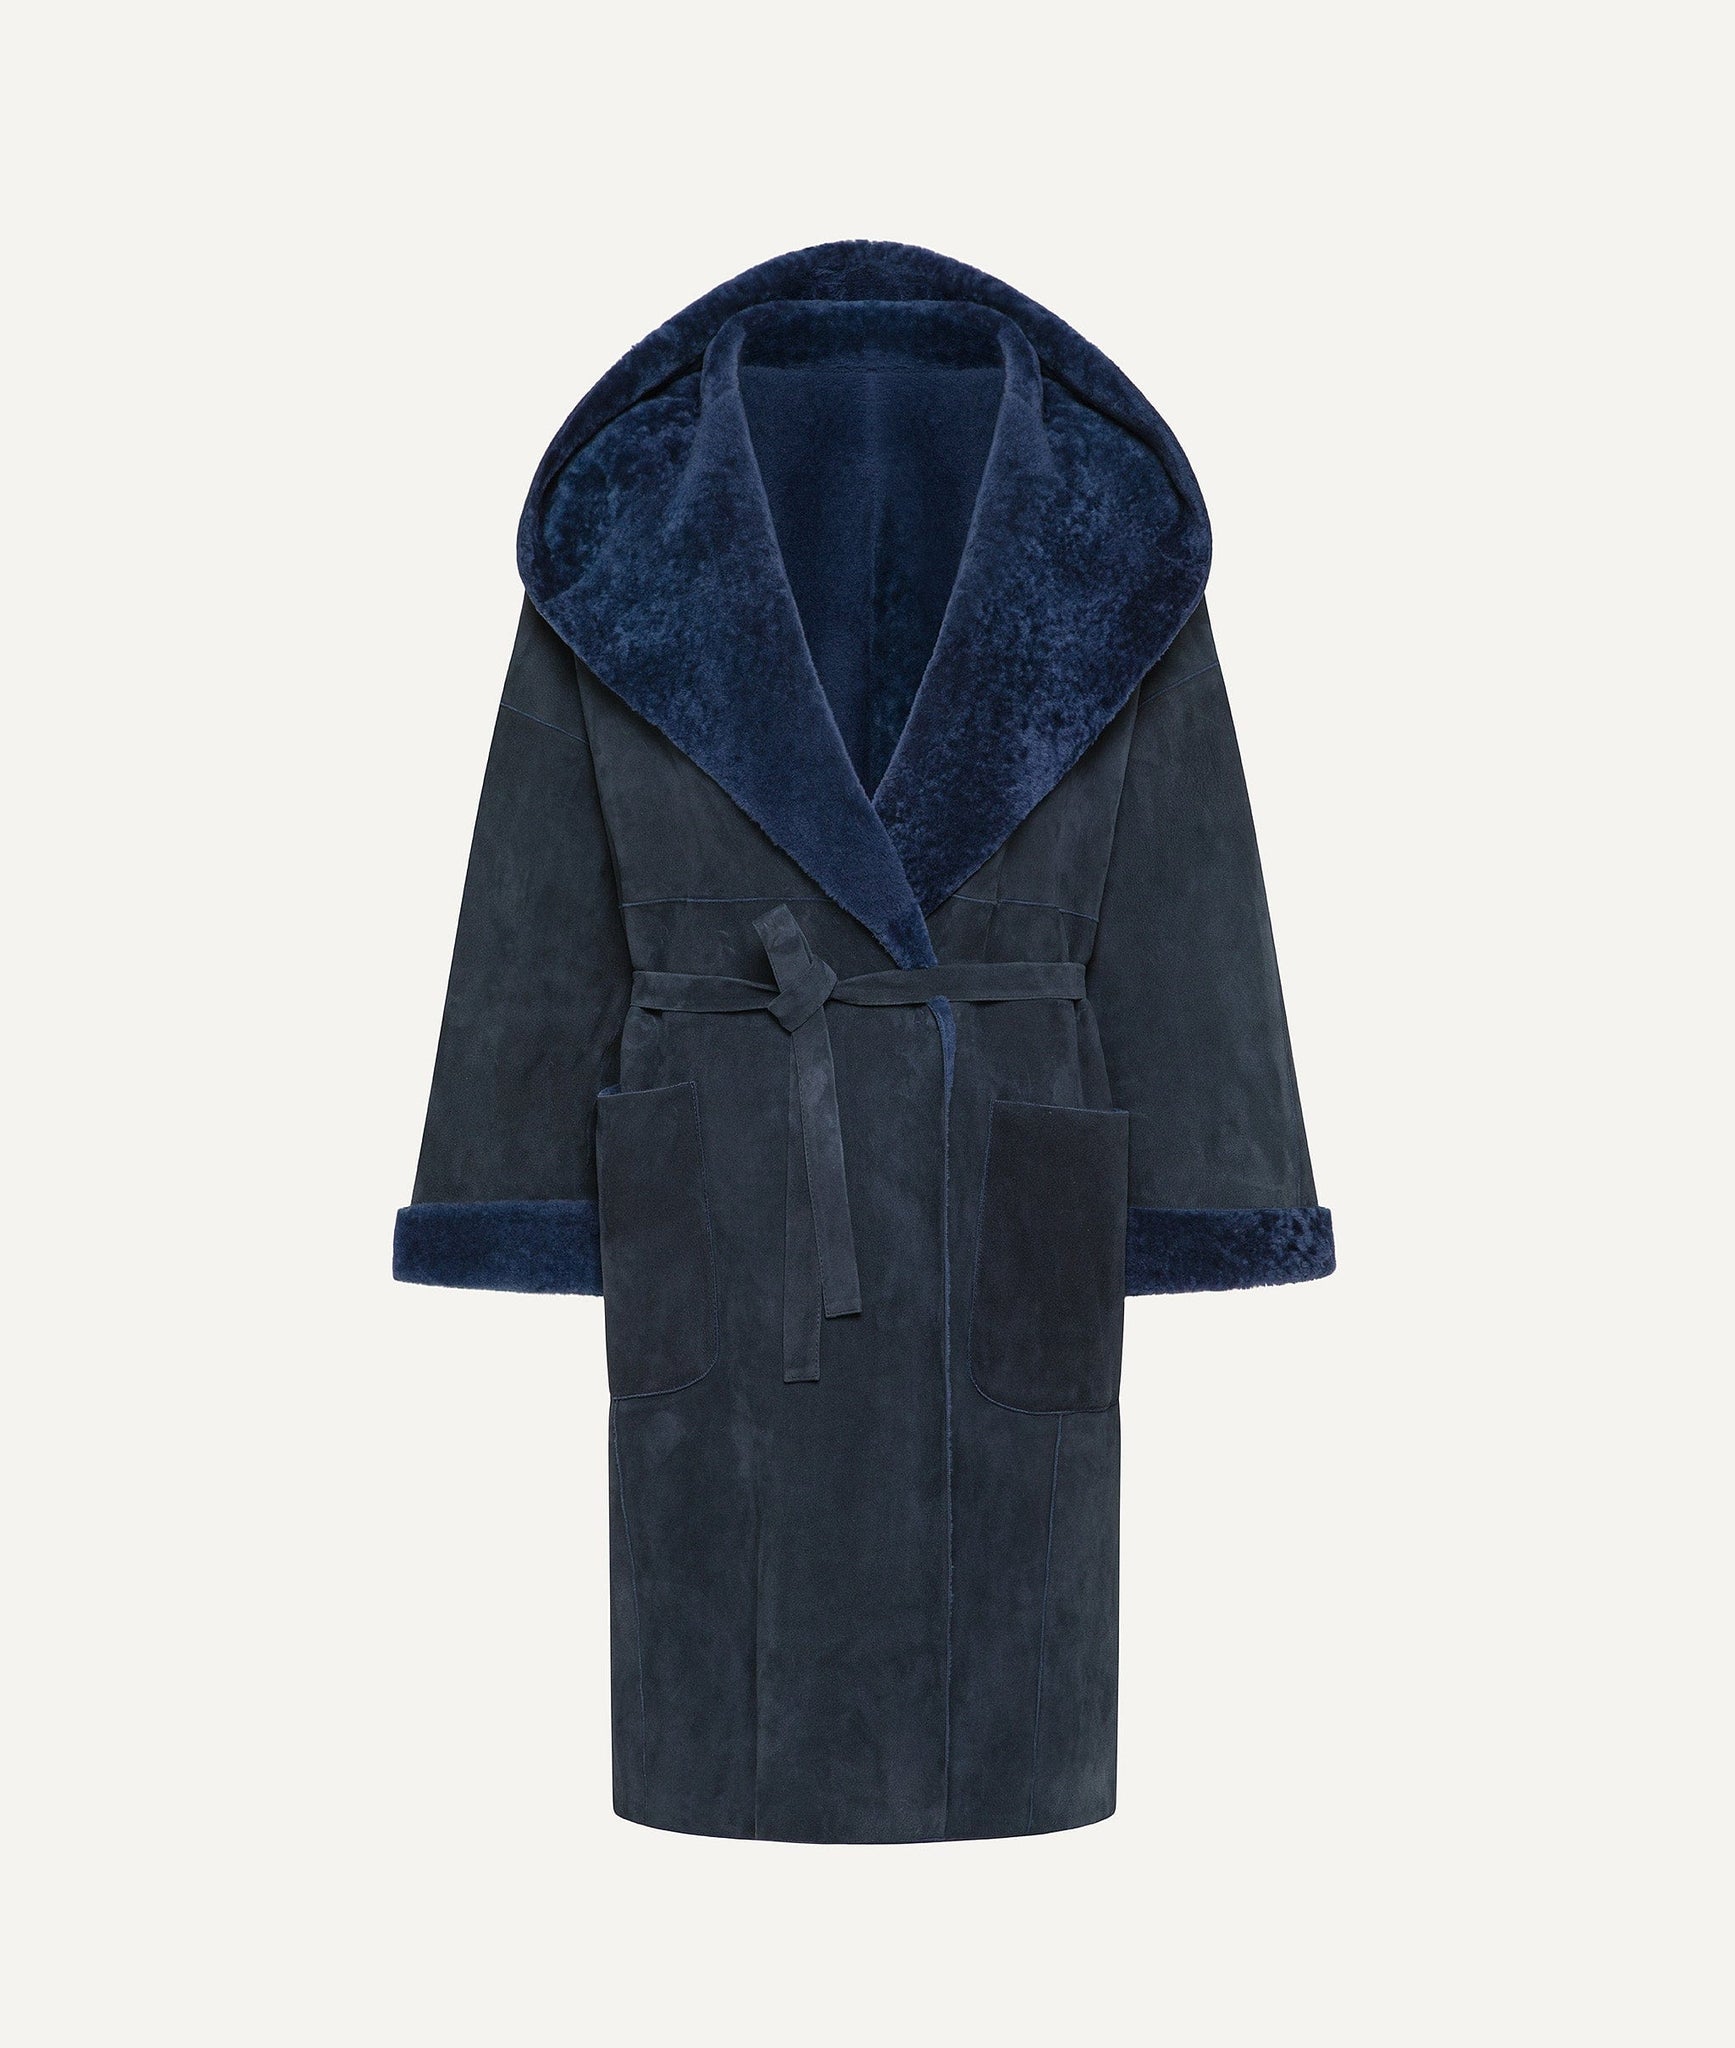 Kiton - Coat with Shearling in Suede